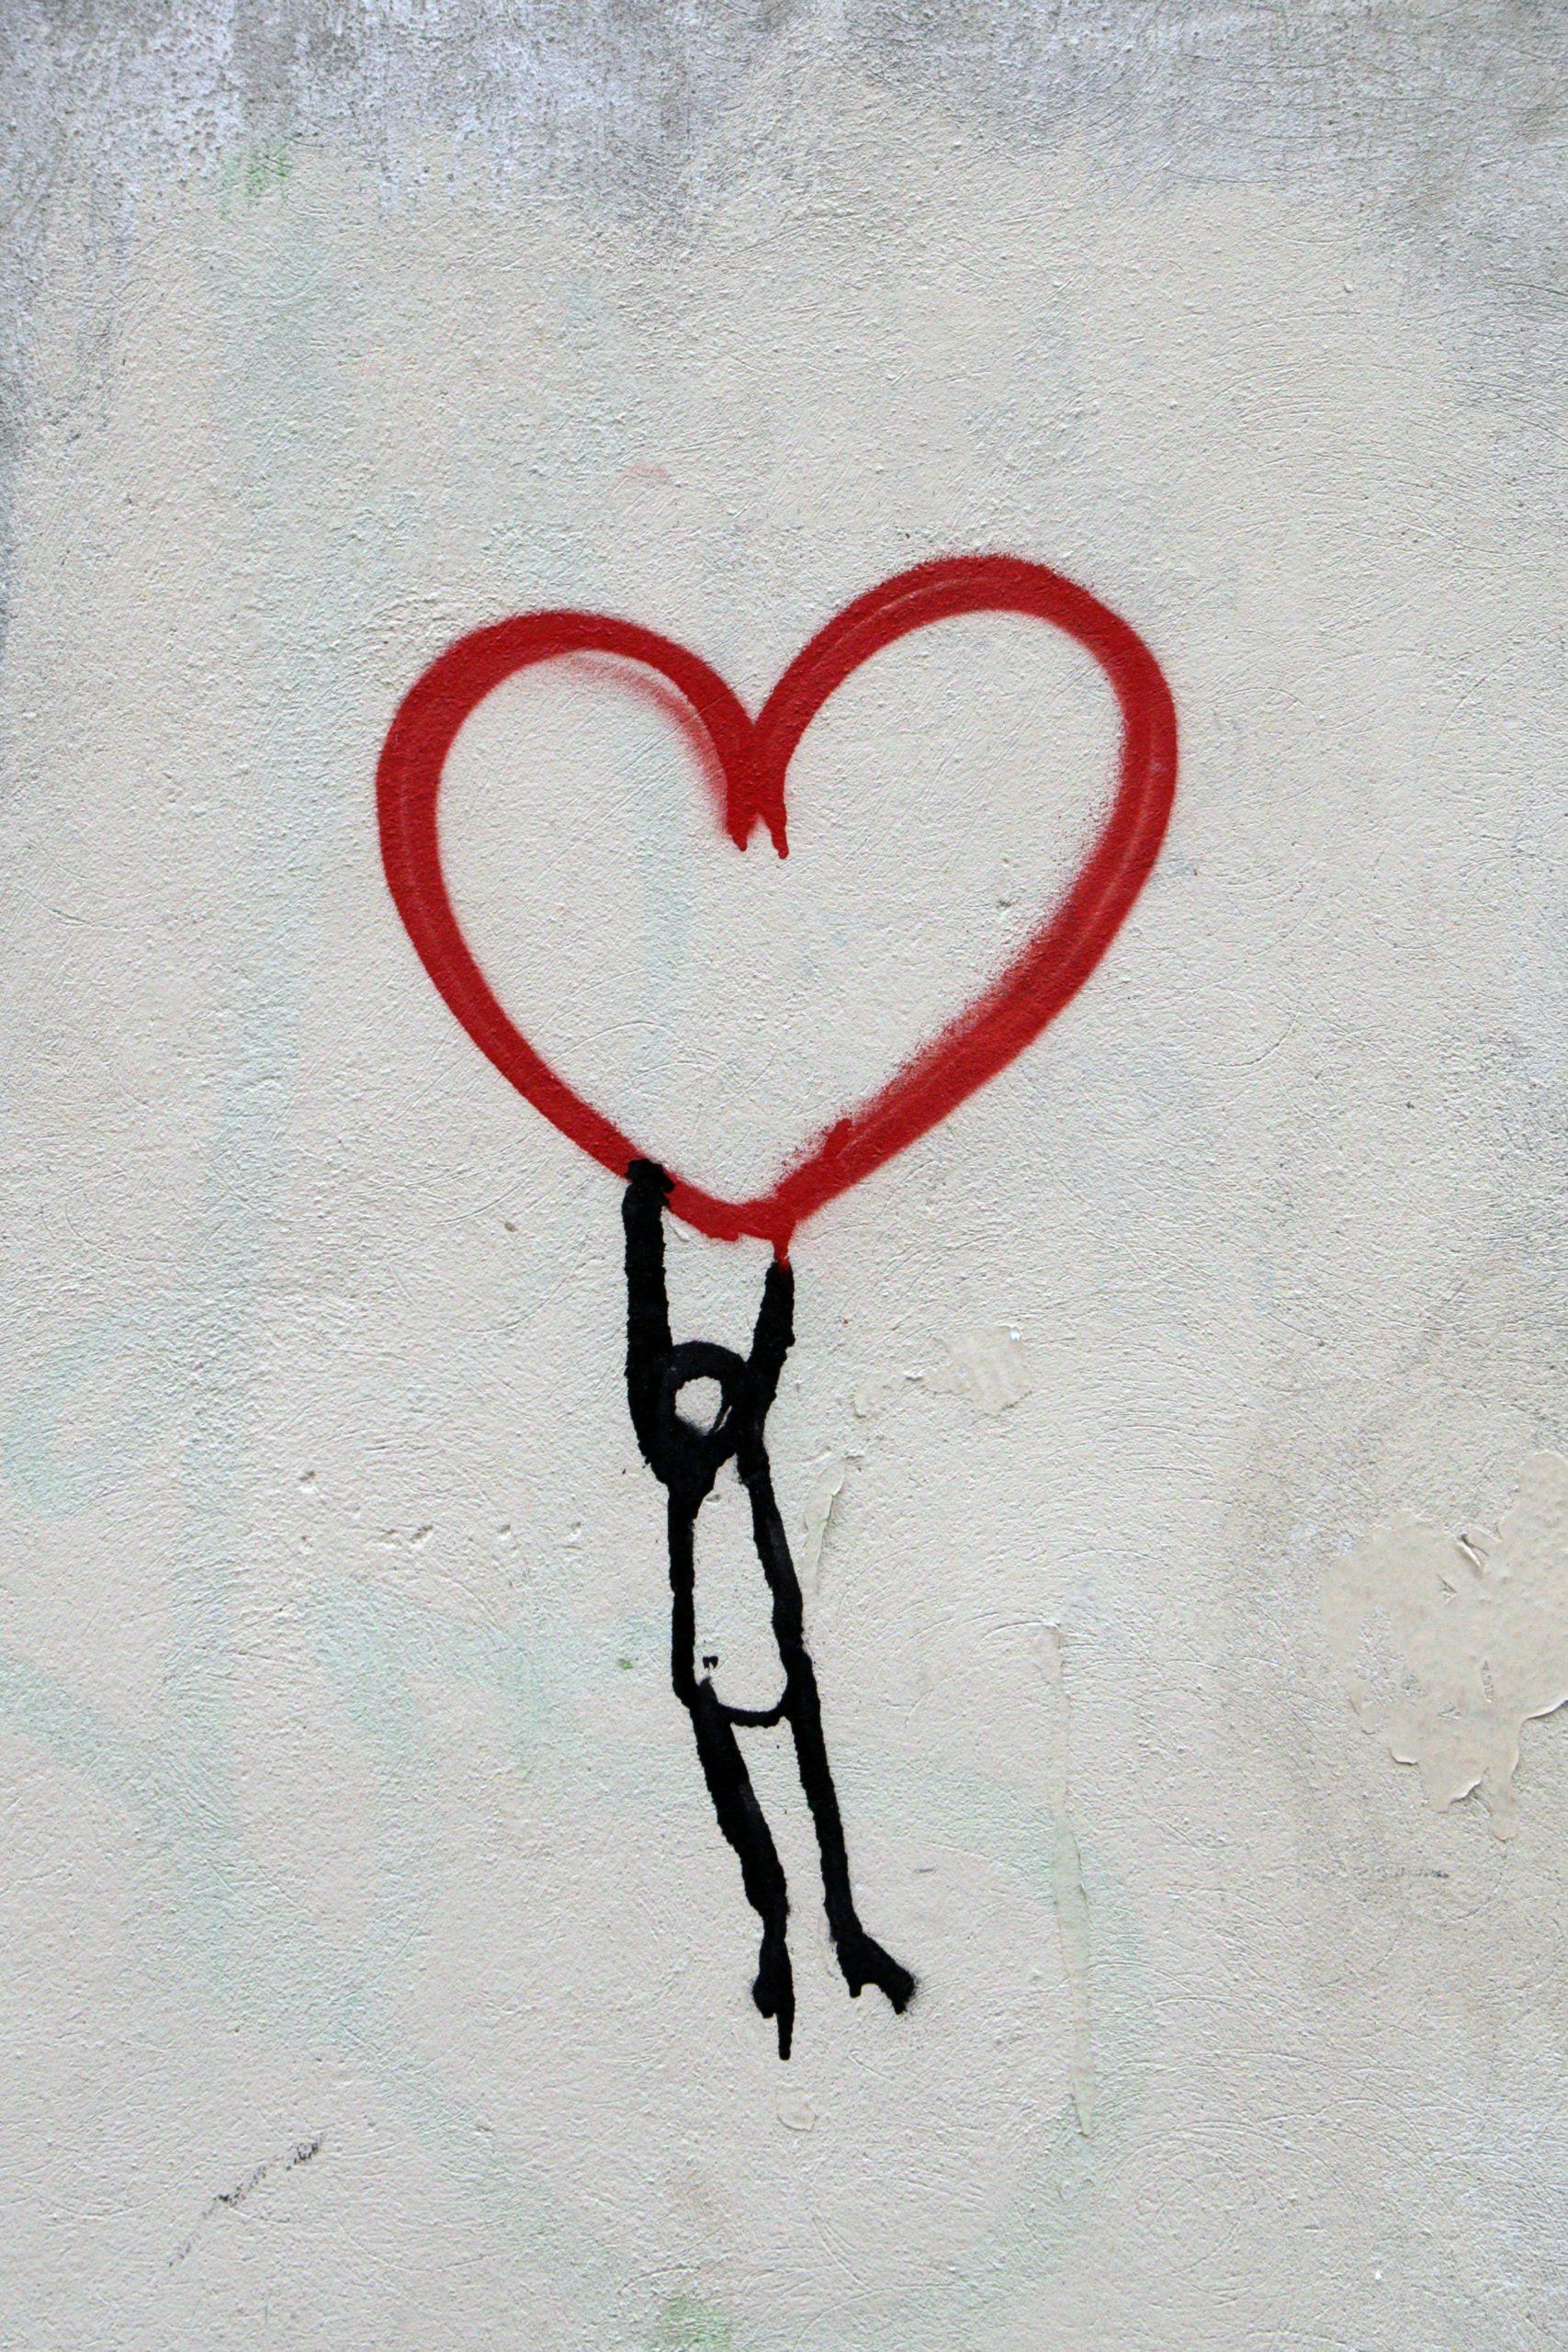 Heart with stick figure